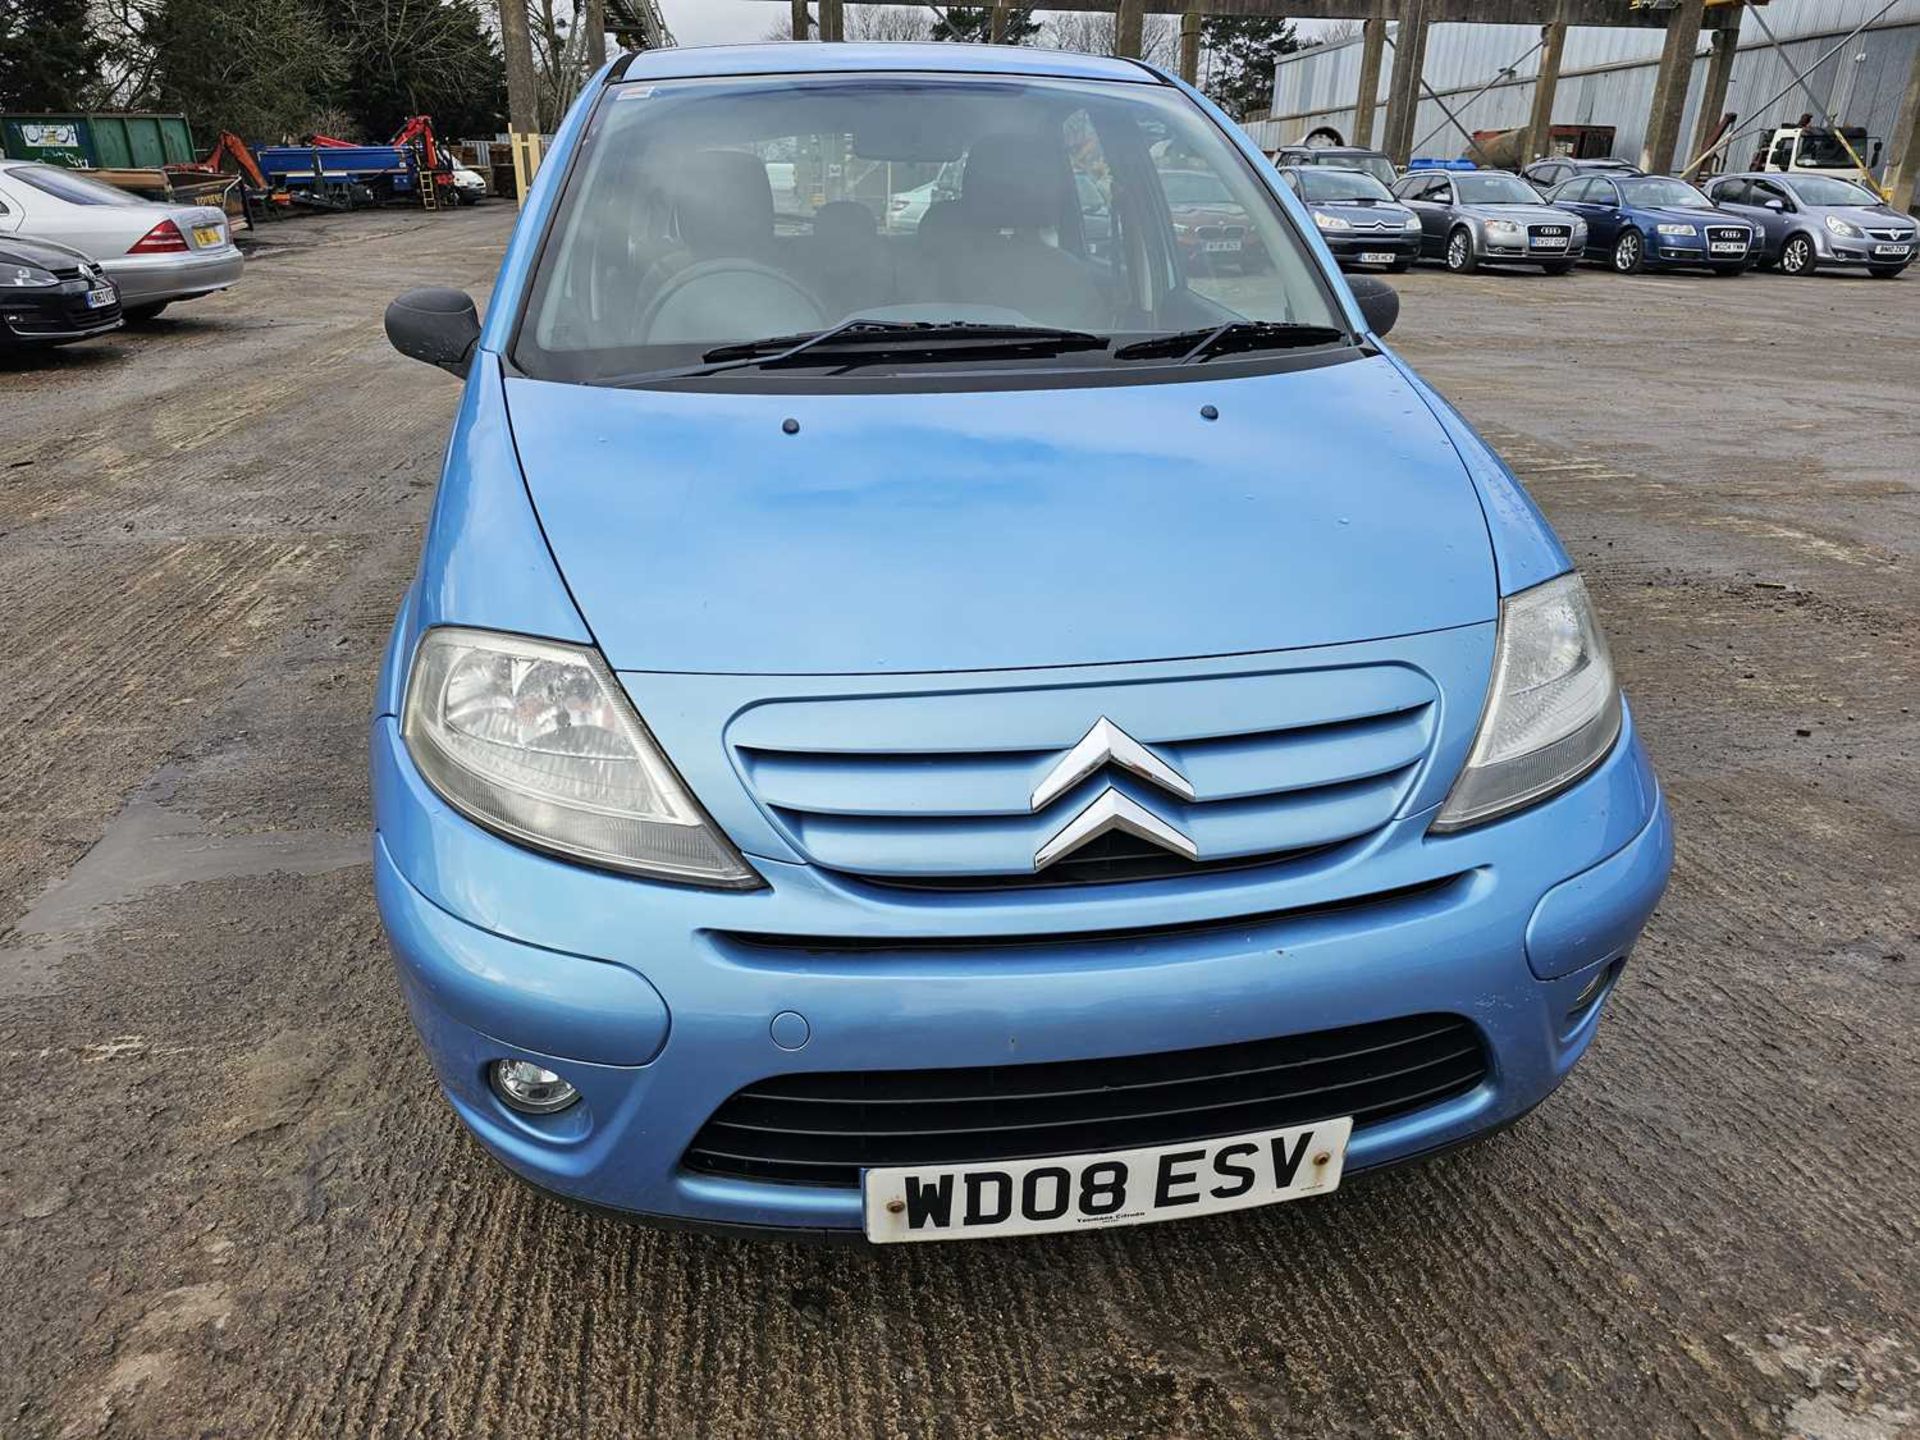 2008 Citroen C3 Cachet, 5 Speed, A/C (Reg. Docs. & Service History Available, Tested 01/25) - Image 4 of 28